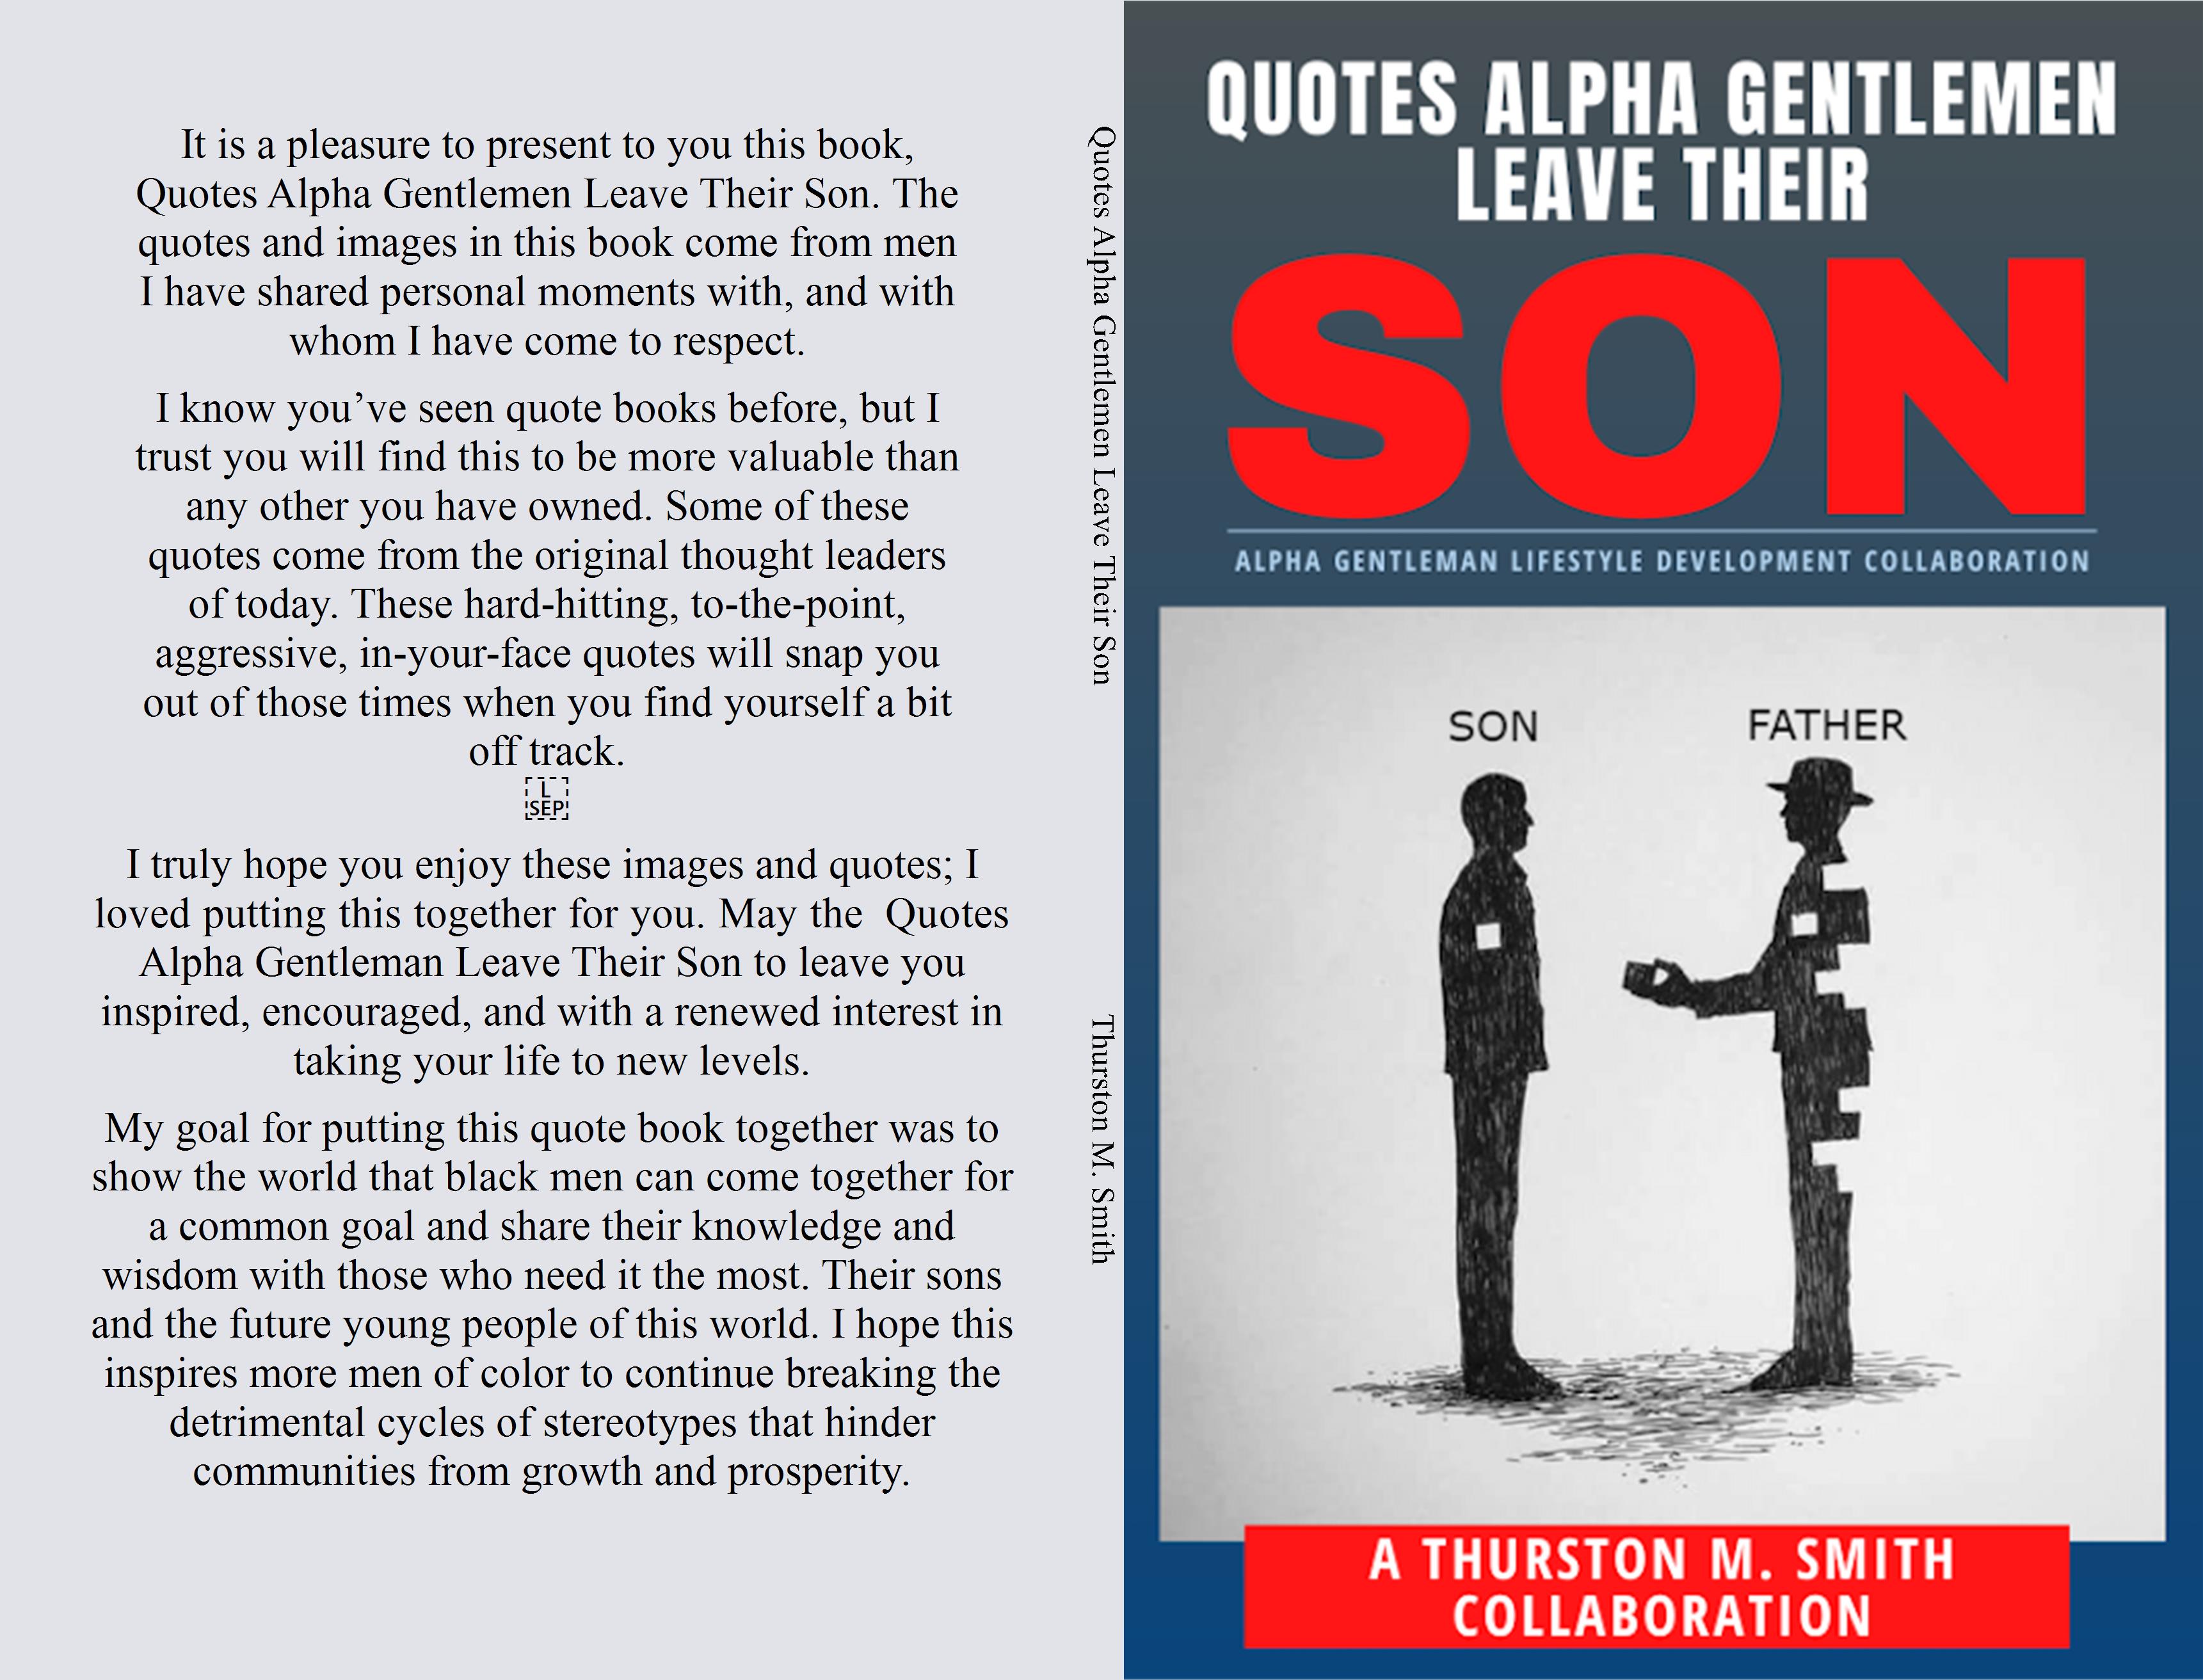 Quotes Alpha Gentlemen Leave Their Son cover image